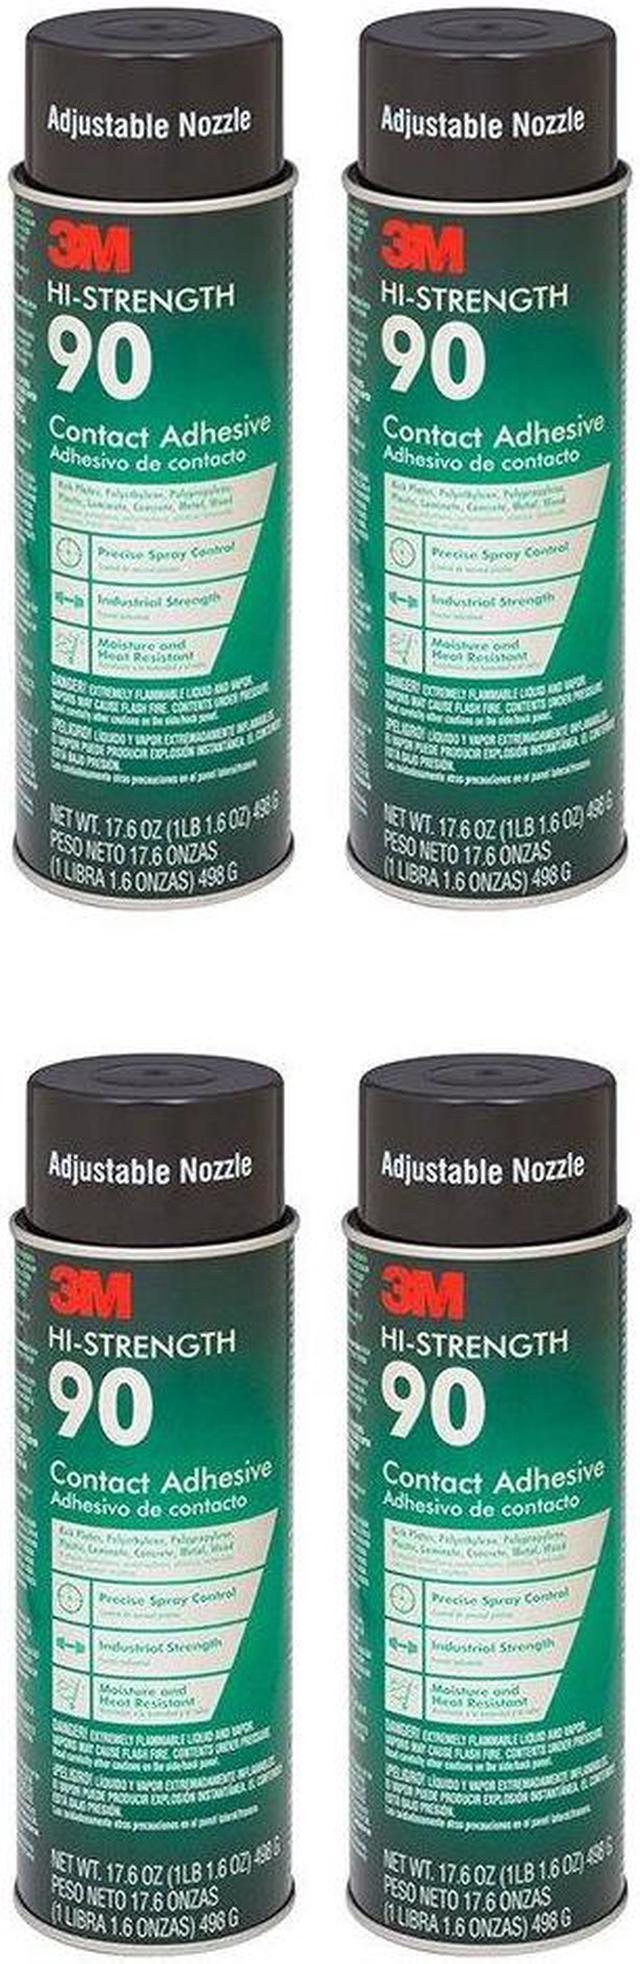 3M Spray Adhesive, 17.6 Ounce (4 cans)